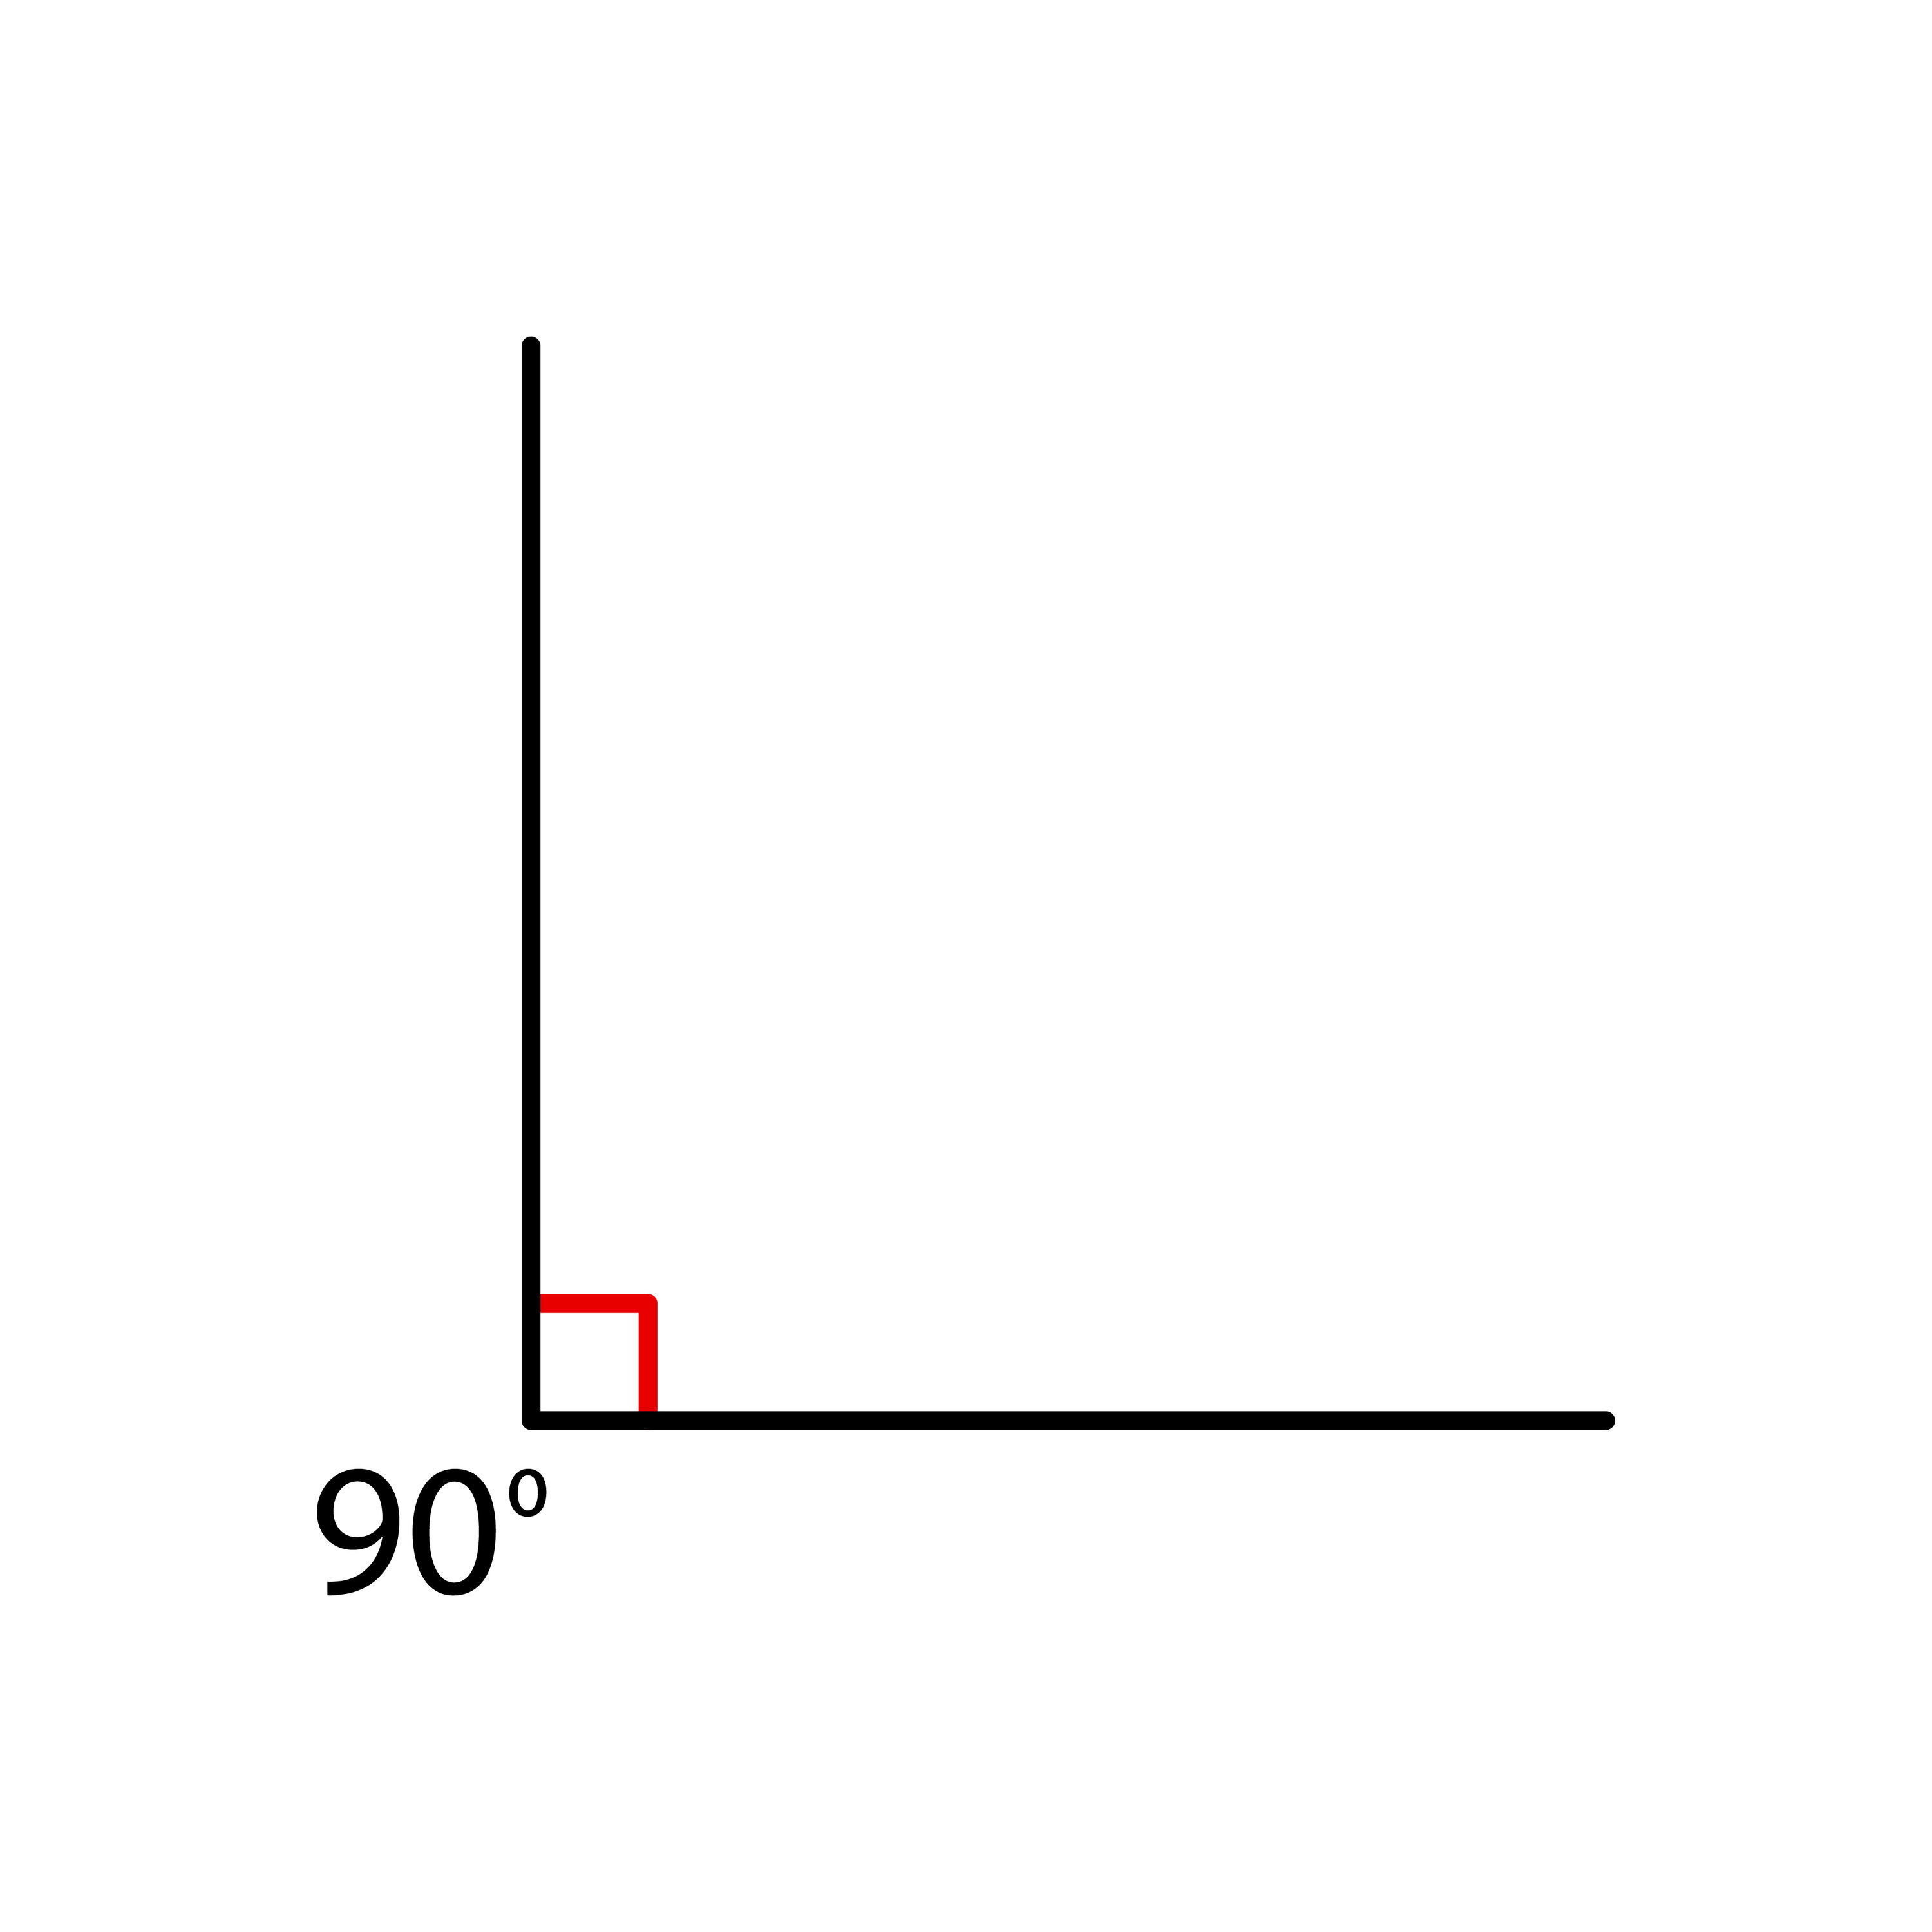 Illustration of a 90-degree angle